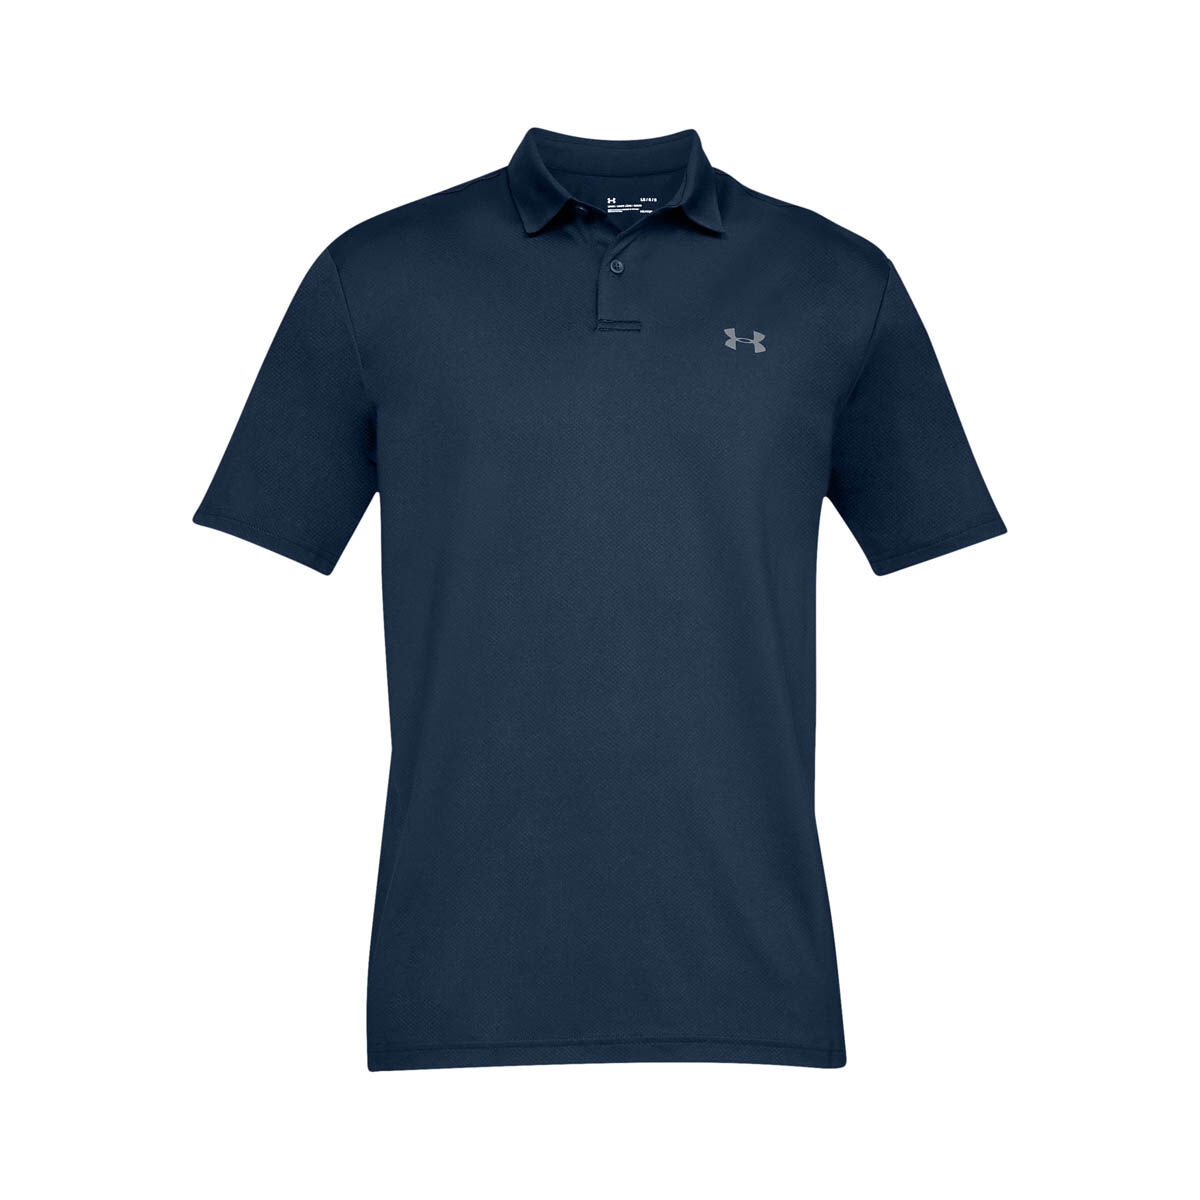 Under Armour Mens Performance Polo 2.0 